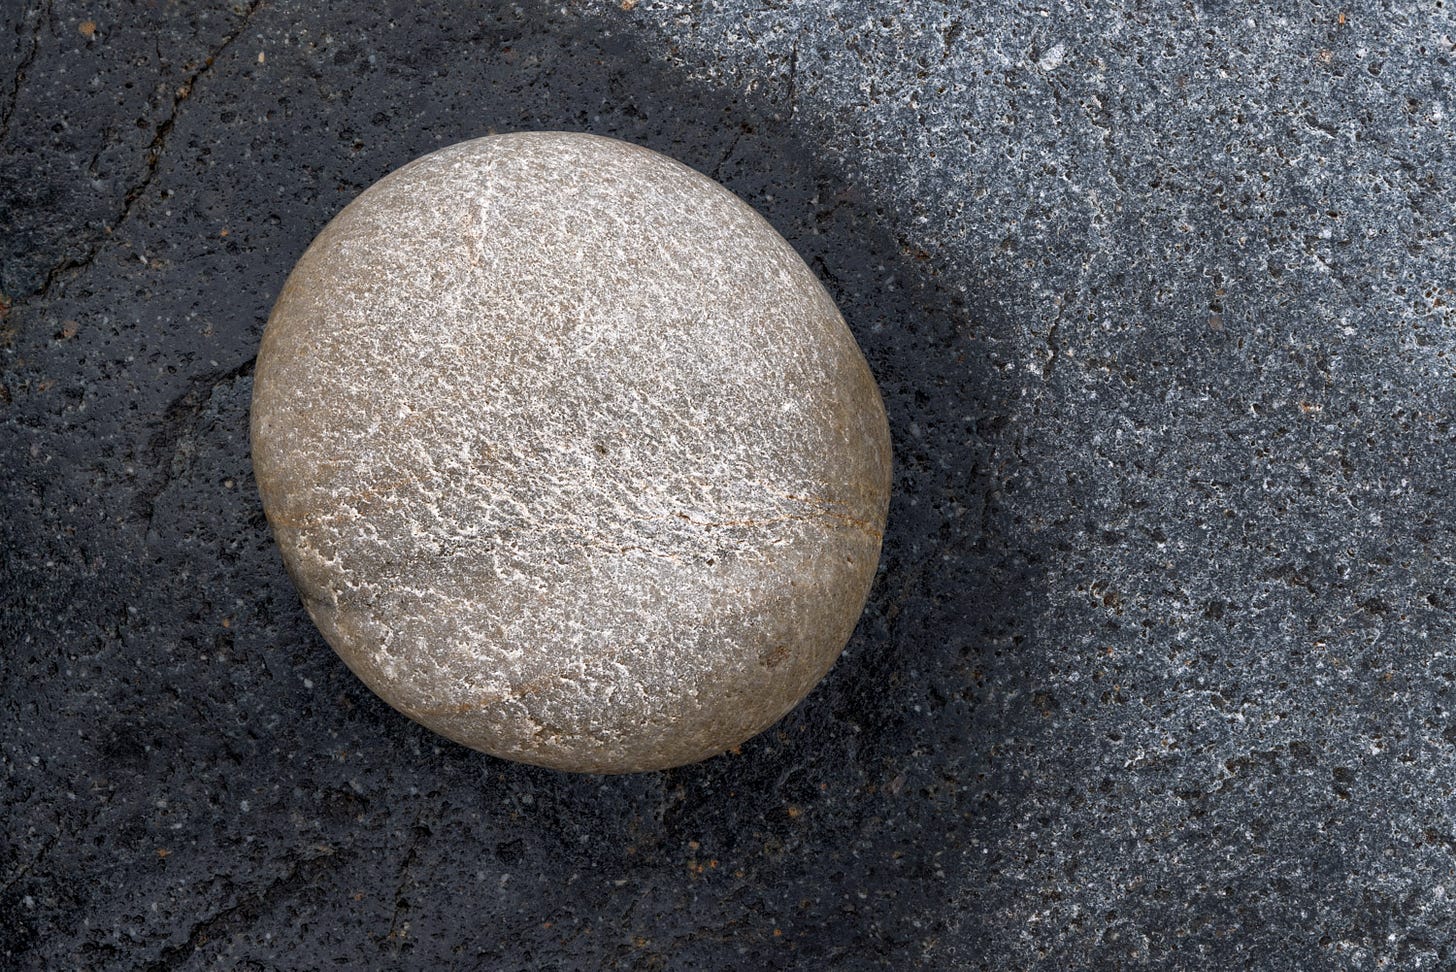 The presence of this round cobble shaped the dampness from the previous tide as it evaporated from the bedrock below in Acadia National Park, Isle au Haut, Maine.